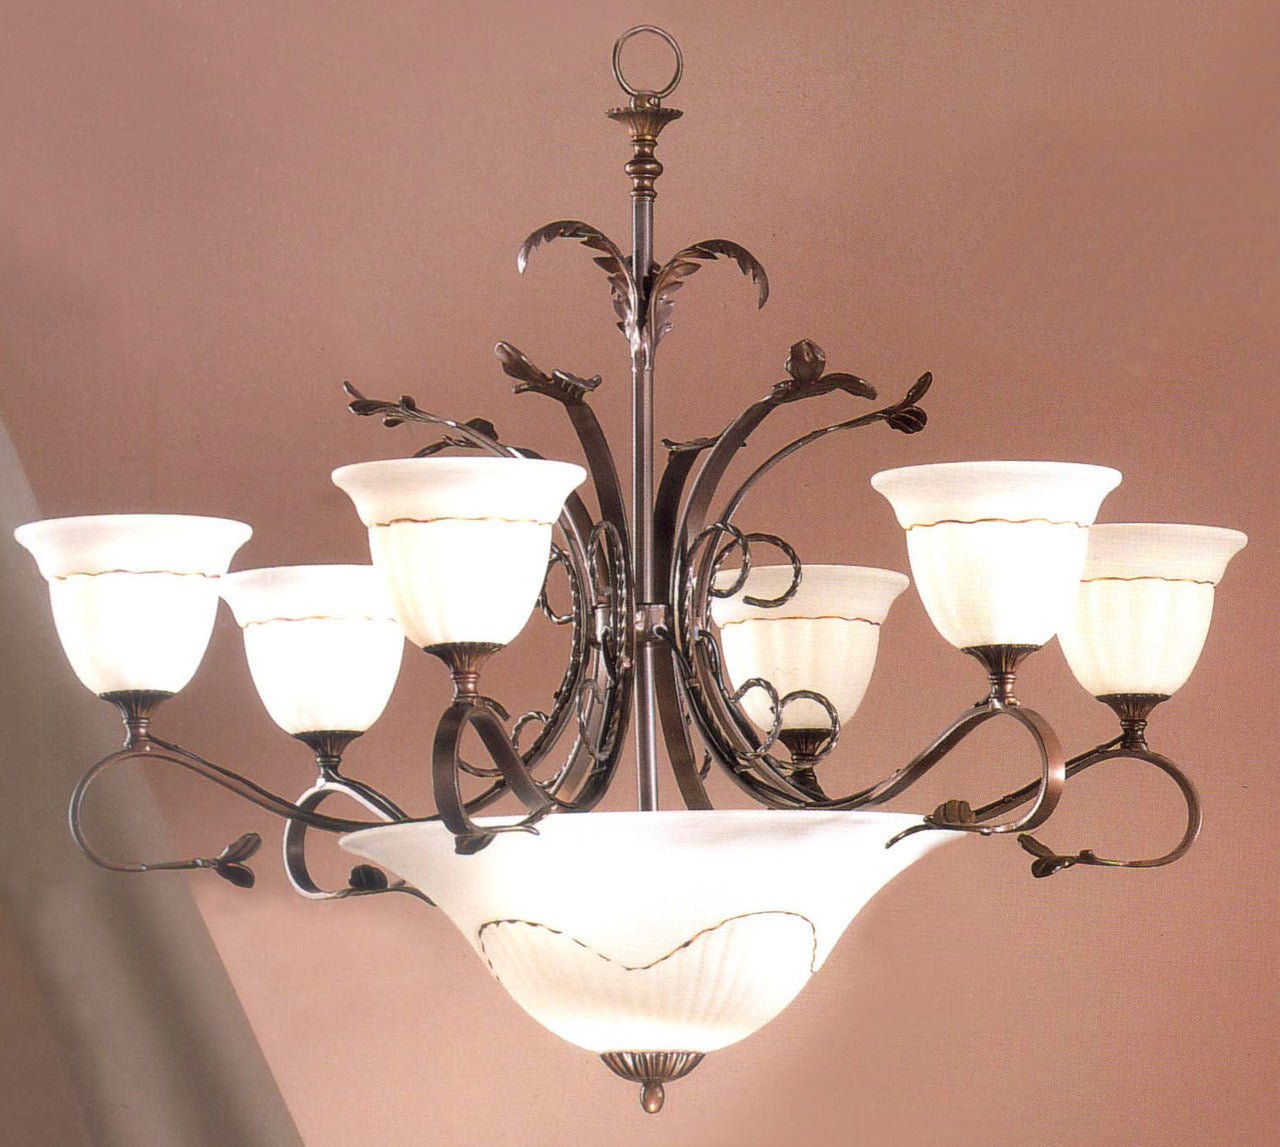 Classic Lighting 4119 BZ Treviso Wrought Iron Chandelier in Bronze (Imported from Italy)